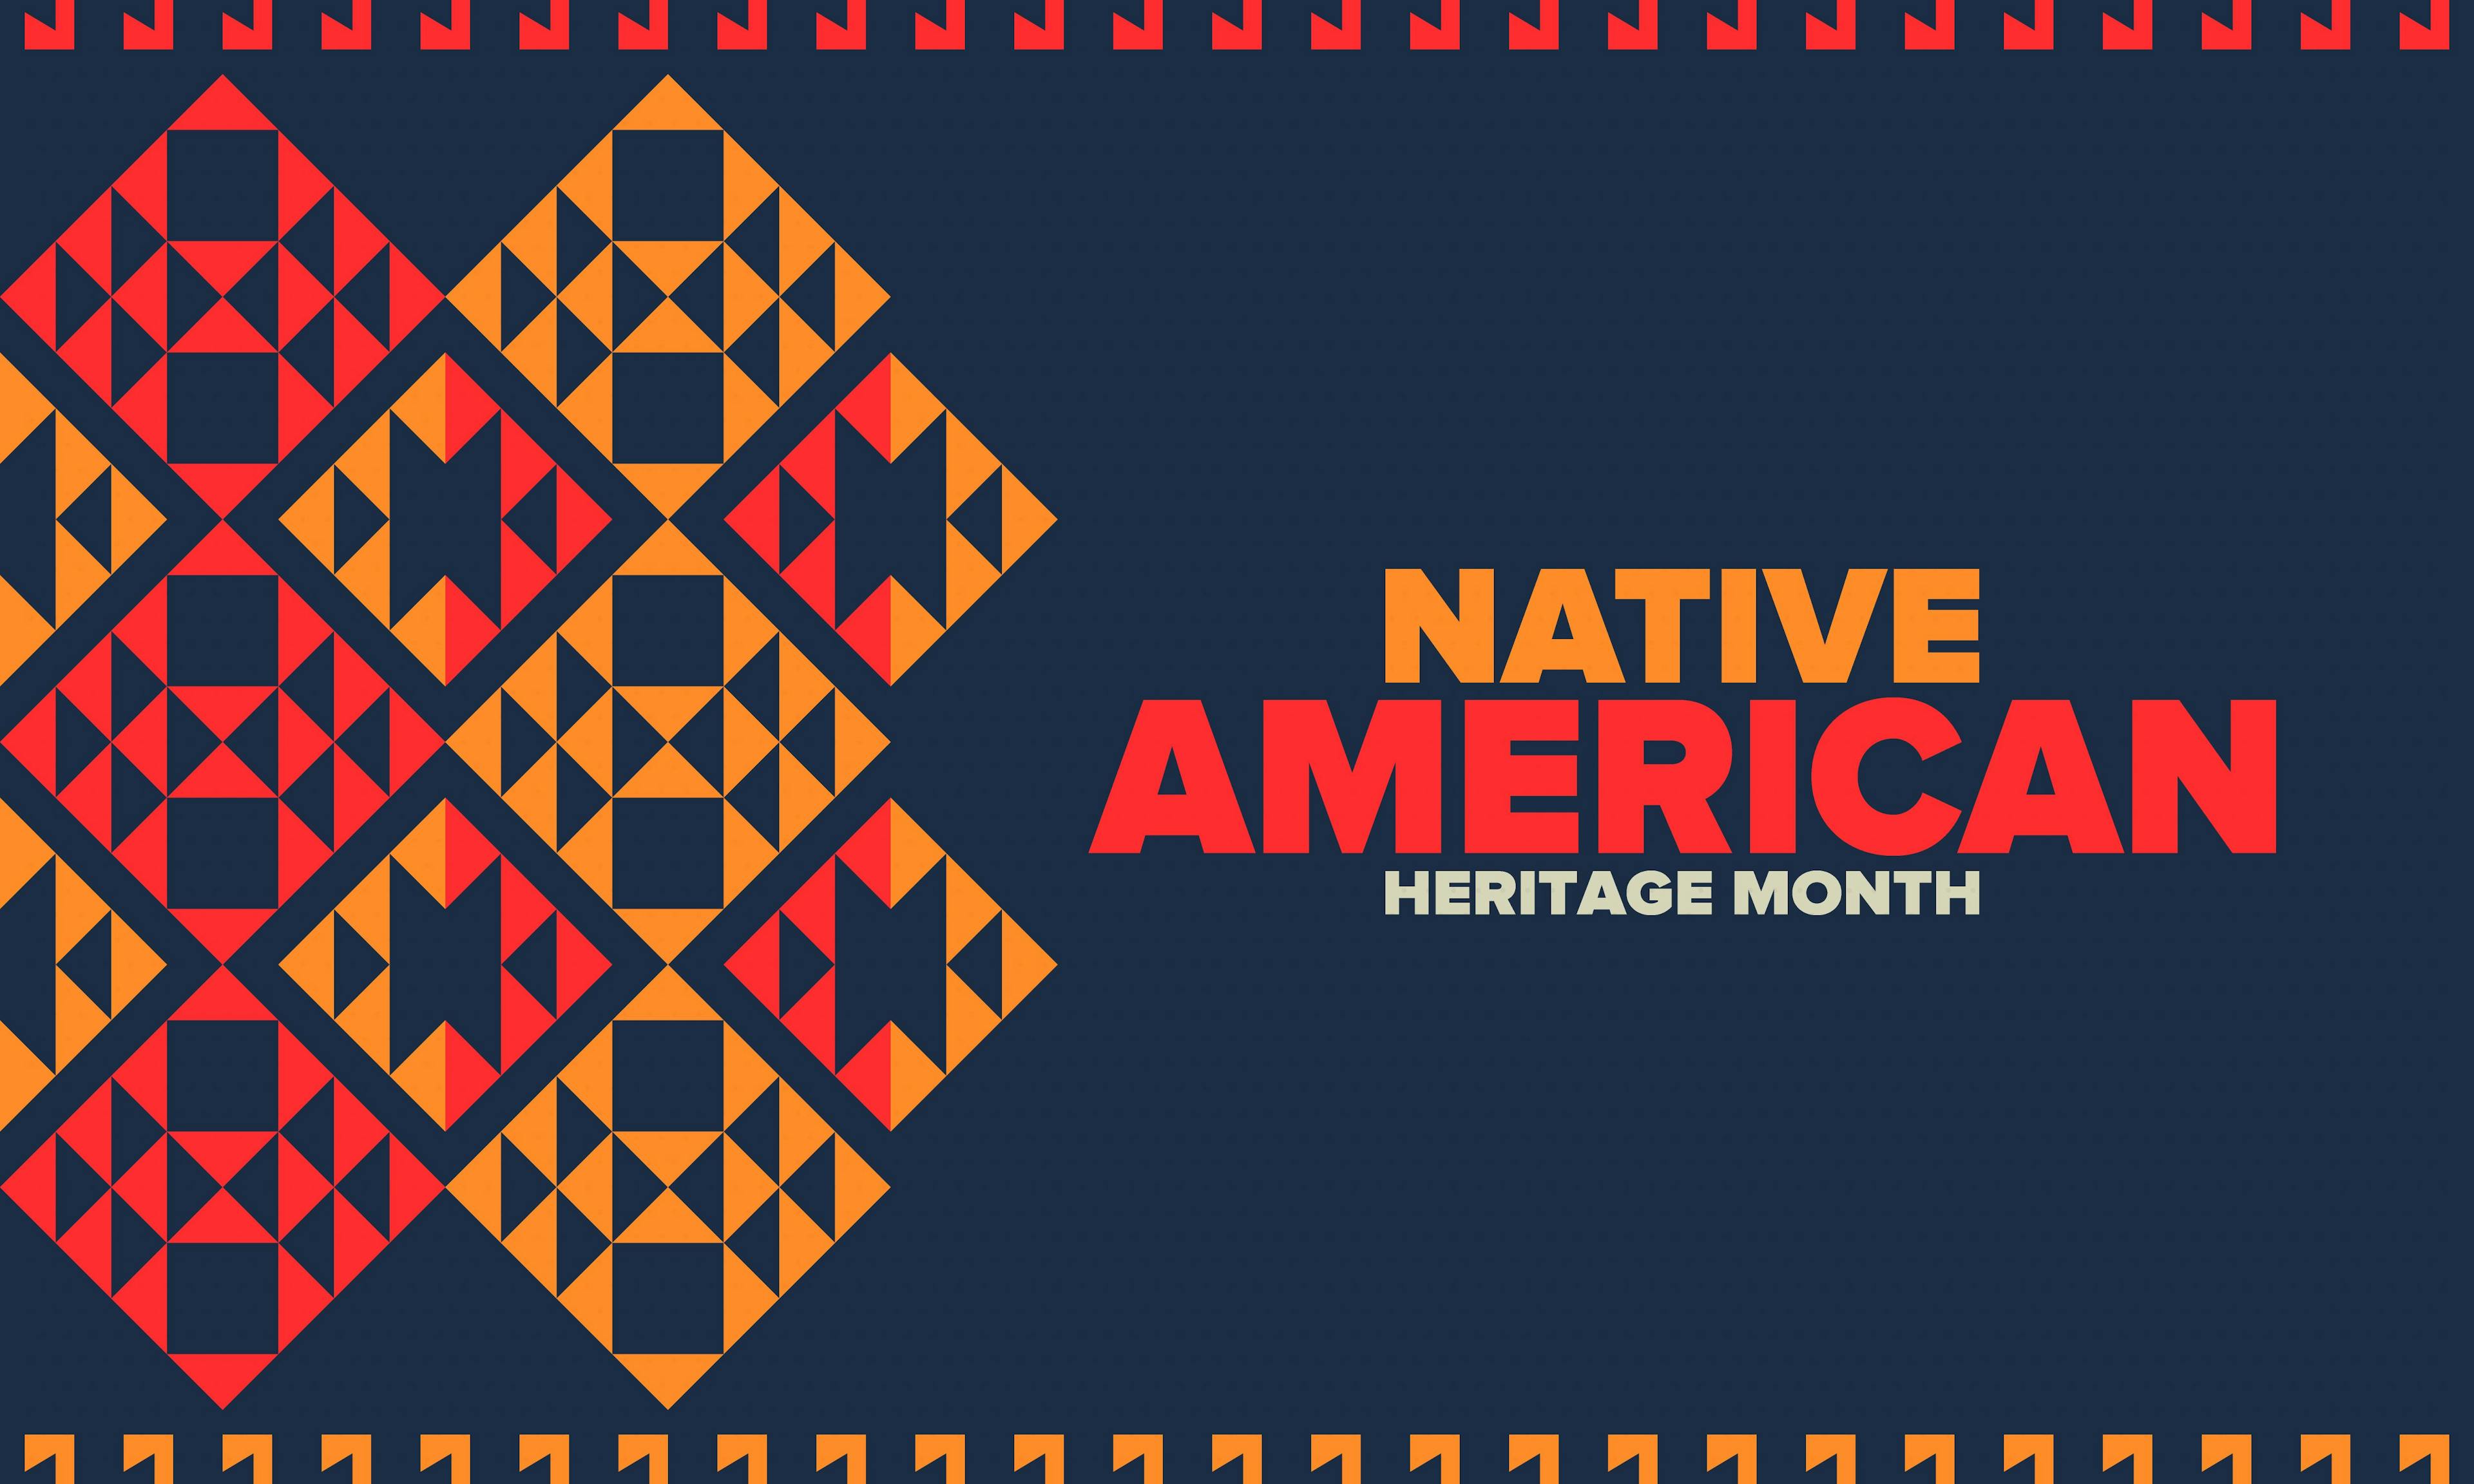 American Indian/Alaska Native Communities Face Barriers to Dermatologic Care, Disparities, and More 